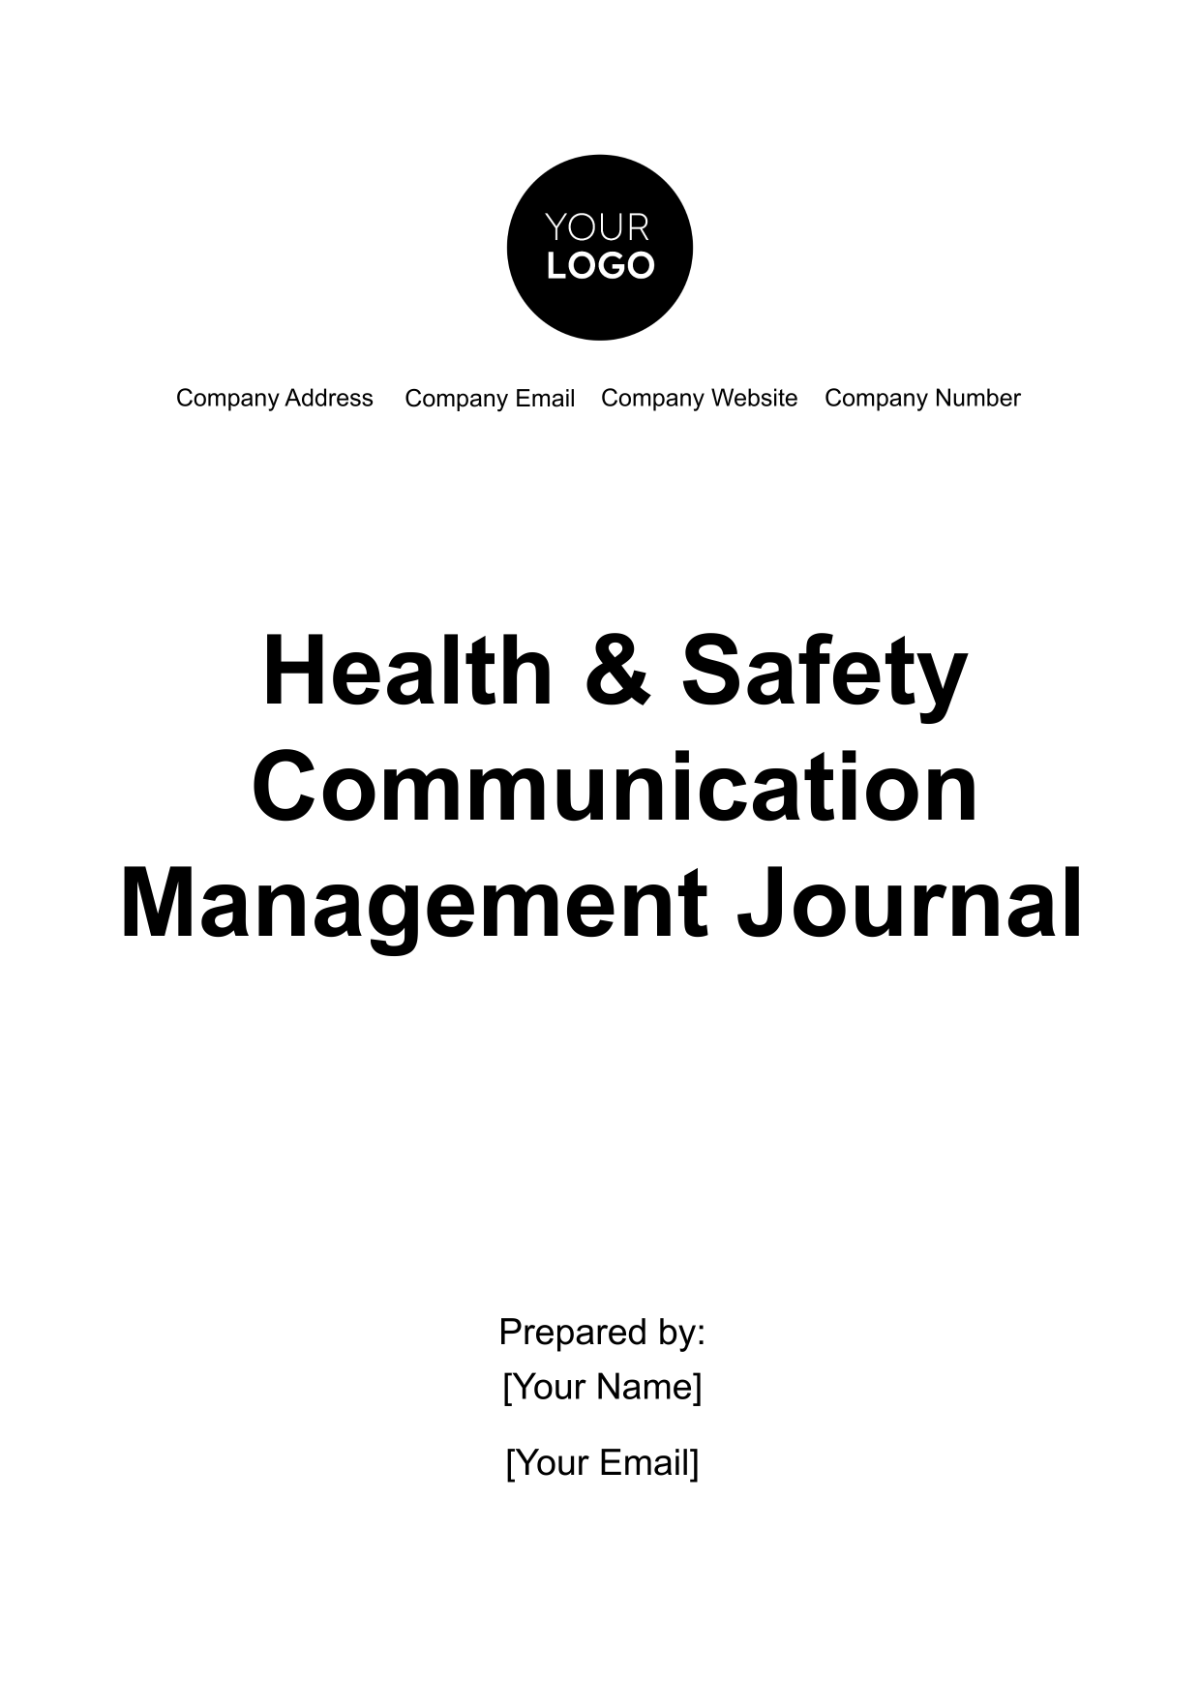 Free Health & Safety Communication Management Journal Template